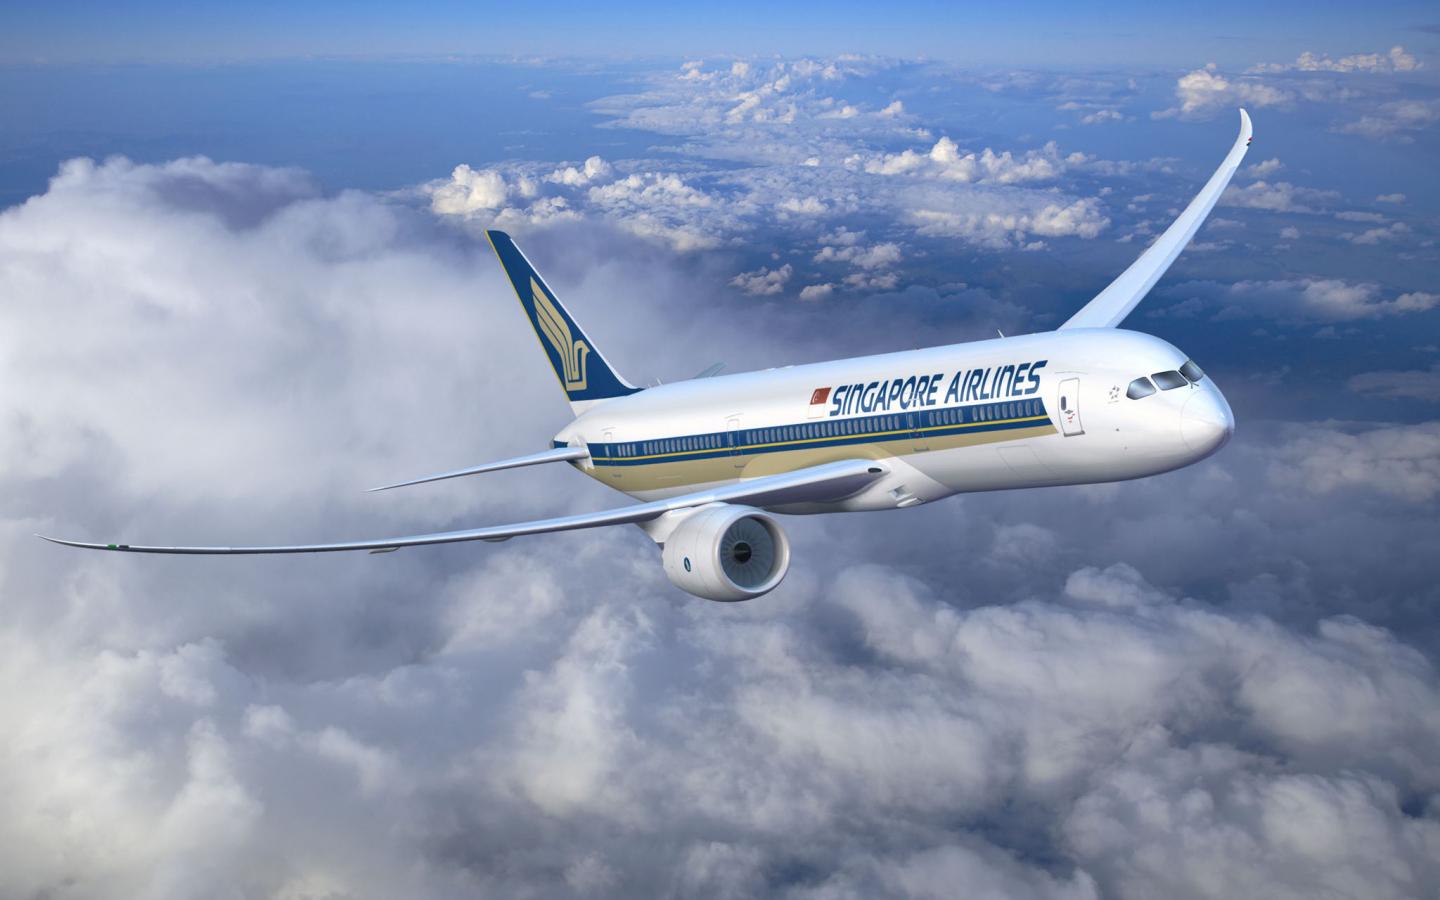 Wallpaper Boeing Singapore Airlines X Widescreen